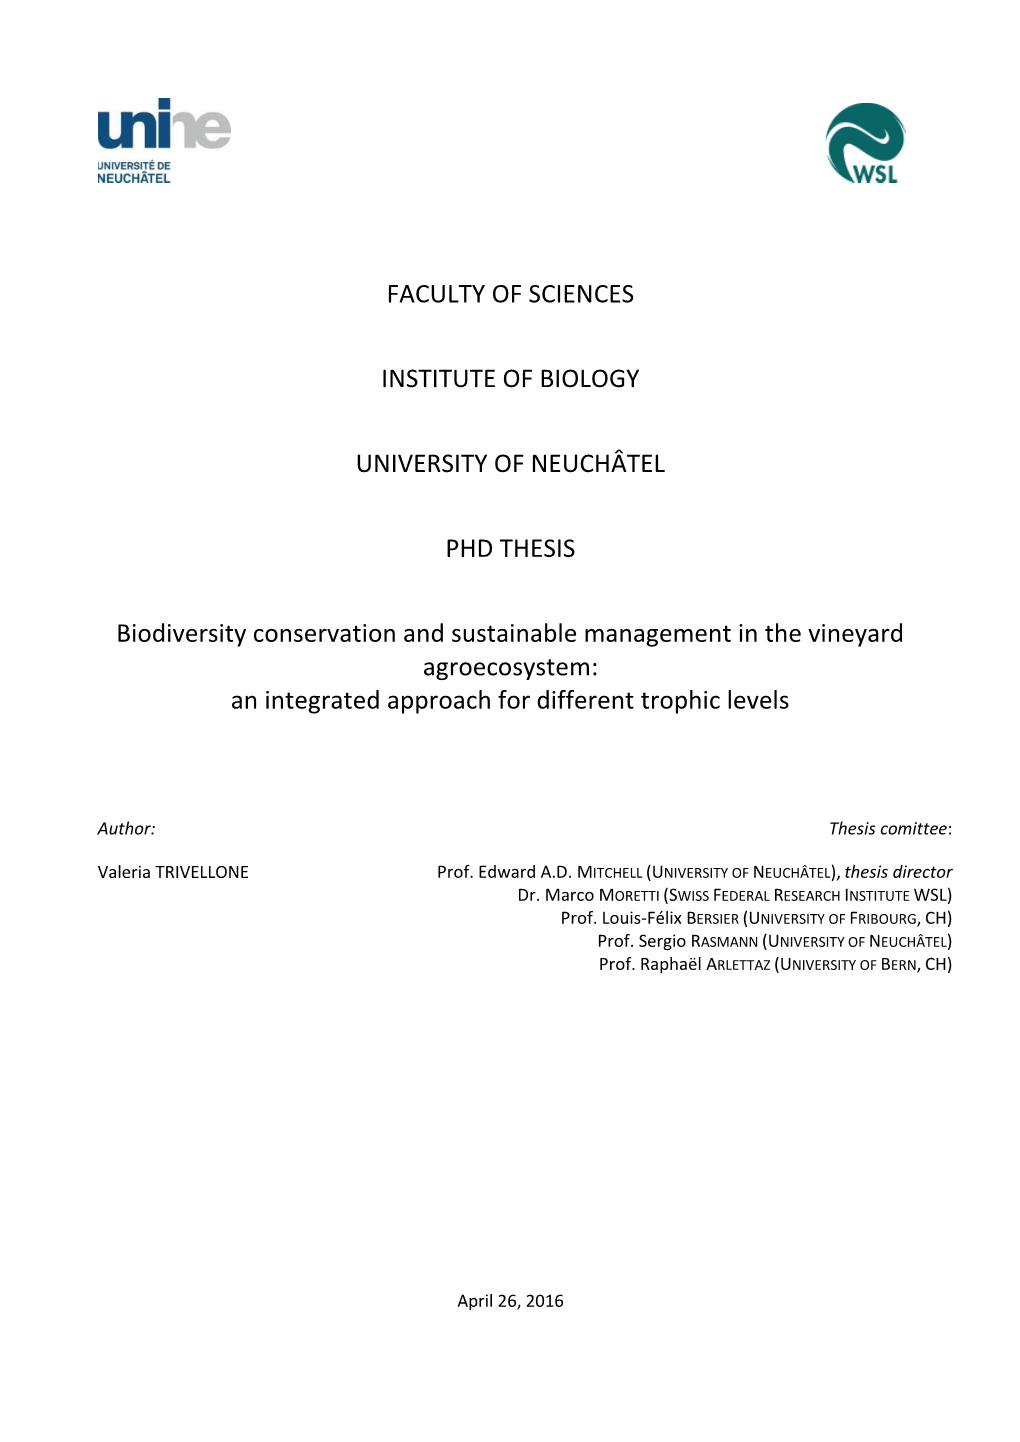 FACULTY of SCIENCES INSTITUTE of BIOLOGY UNIVERSITY of NEUCHÂTEL PHD THESIS Biodiversity Conservation and Sustainable Managemen